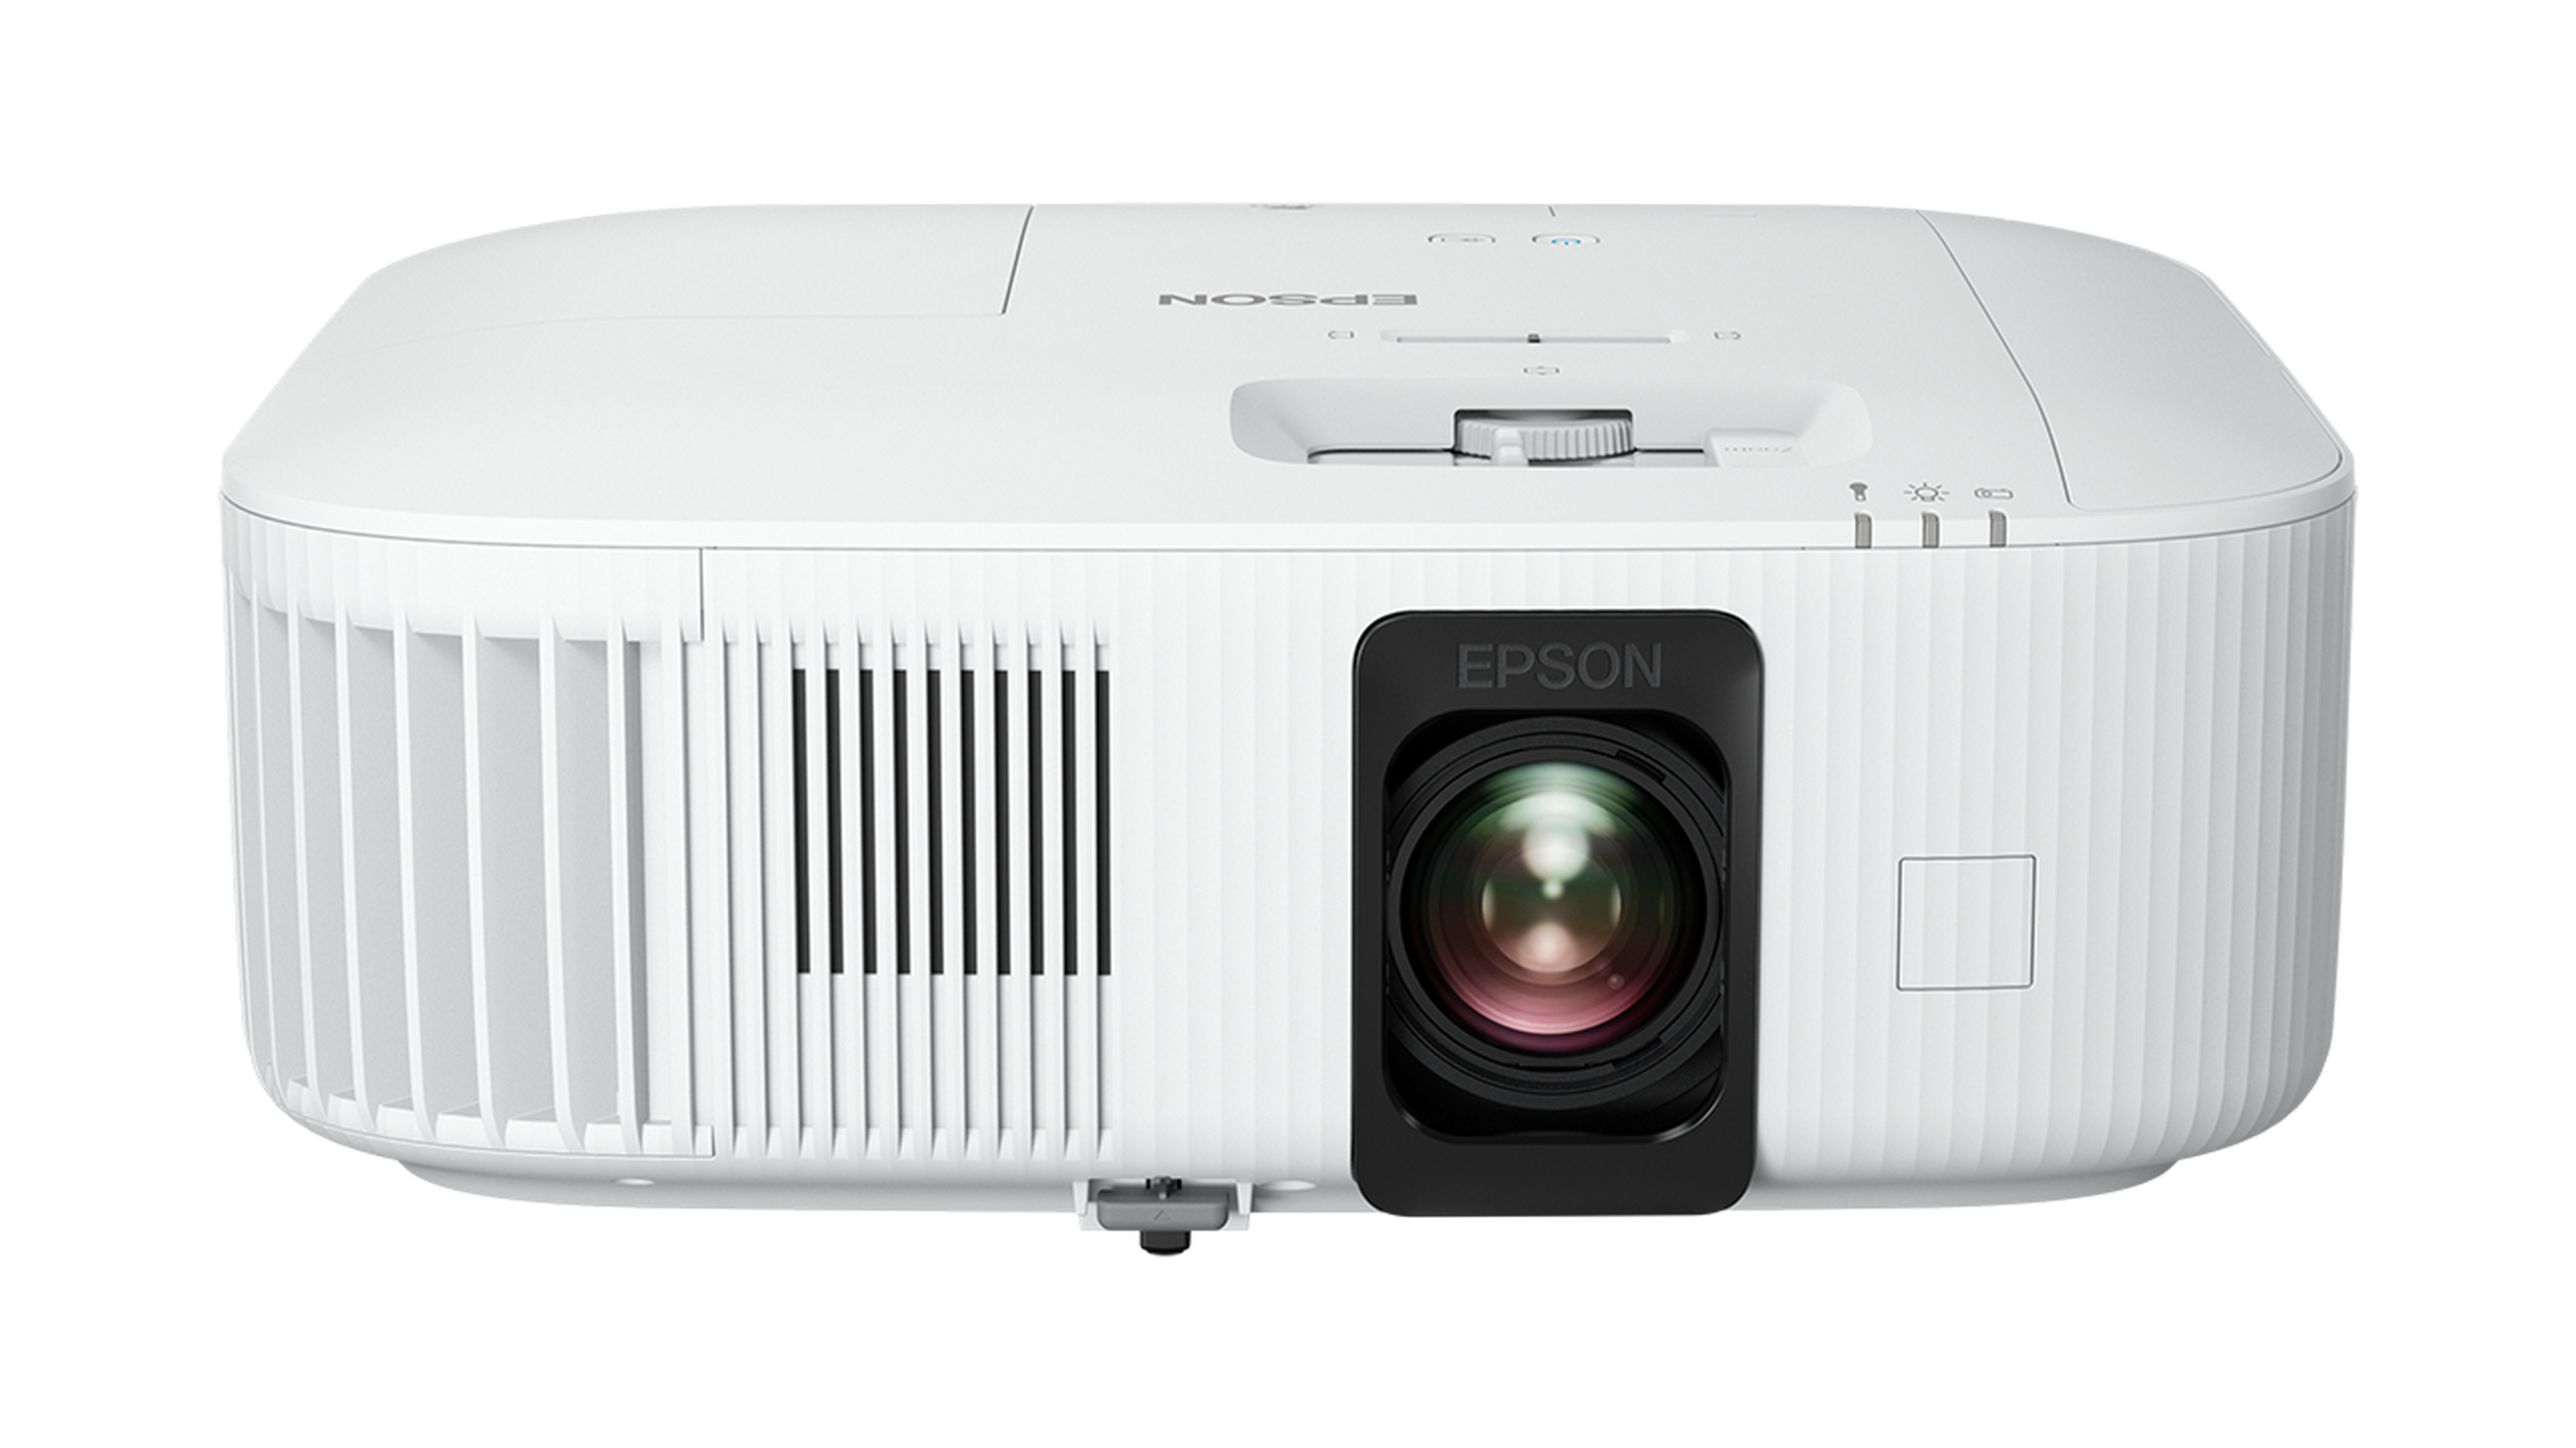 Epson 4K Projector EH-TW6150